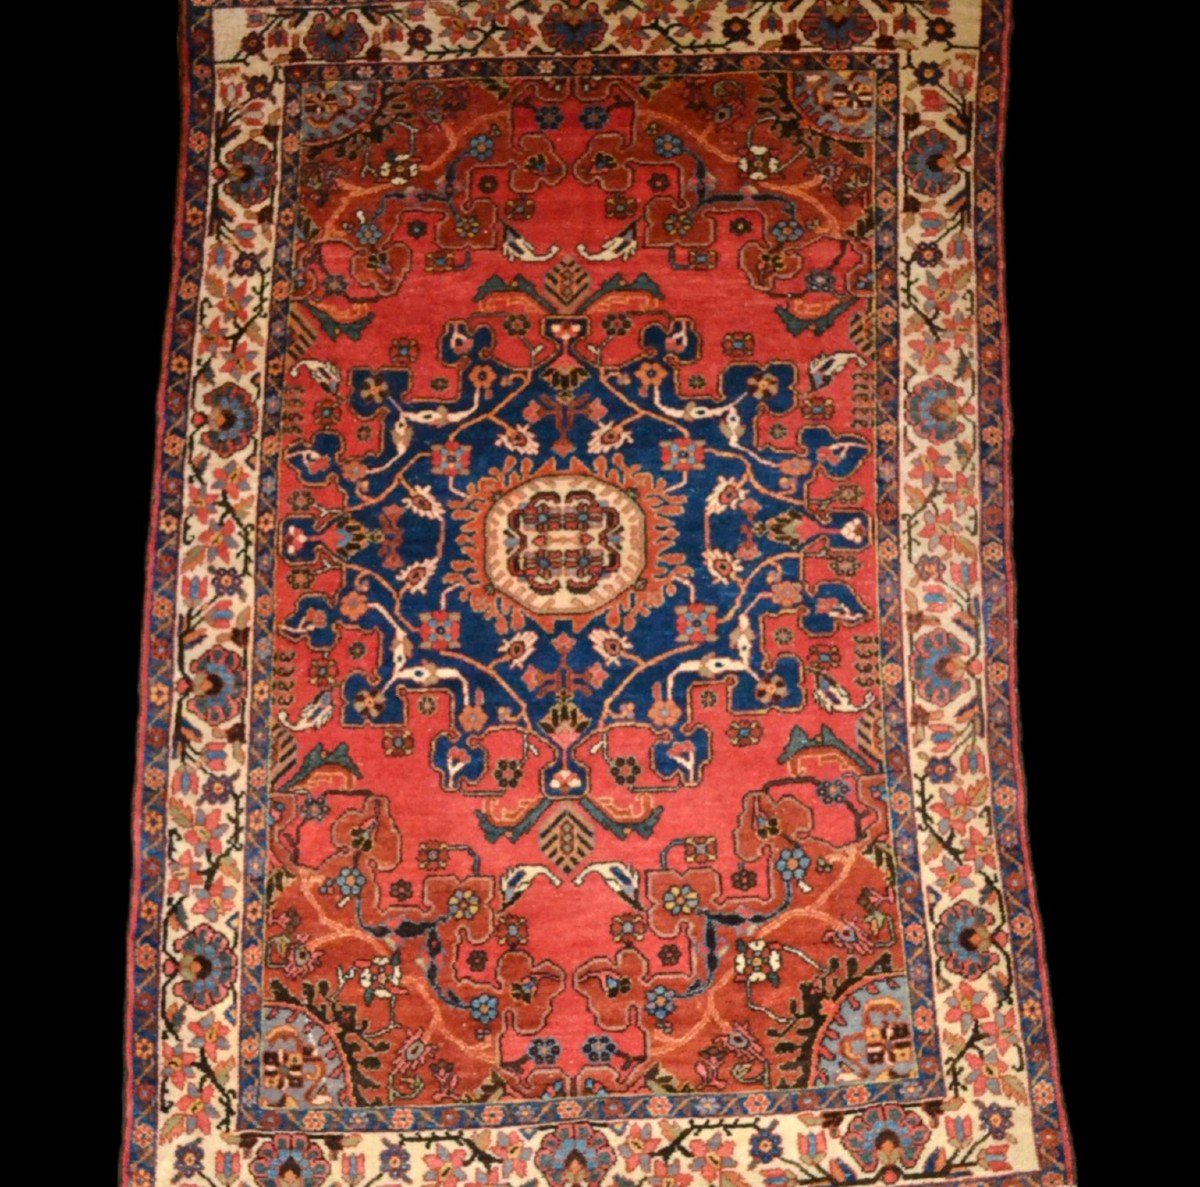 Old Persian Tafresh Rug, 135 X 194 Cm, Hand-knotted Wool In Iran At The Beginning Of The 20th Century